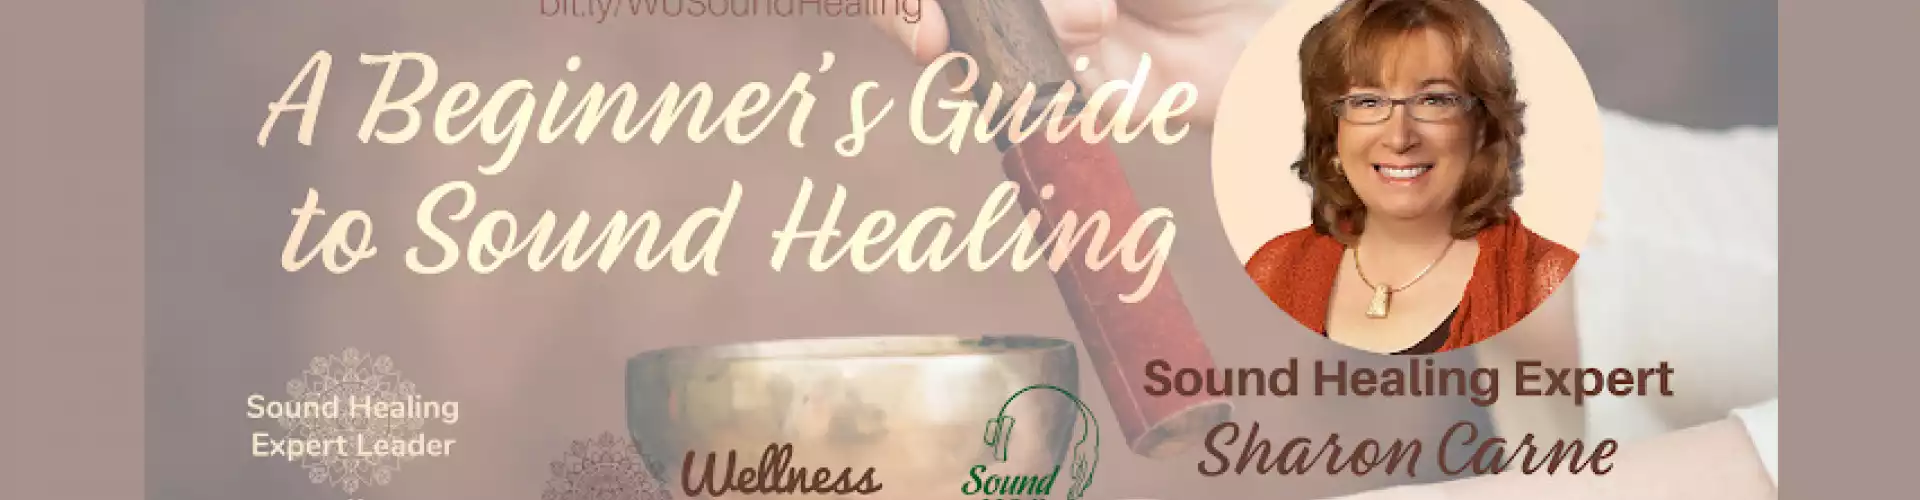 A Beginners Guide to Sound Healing with WU Expert Leader Sharon Carne